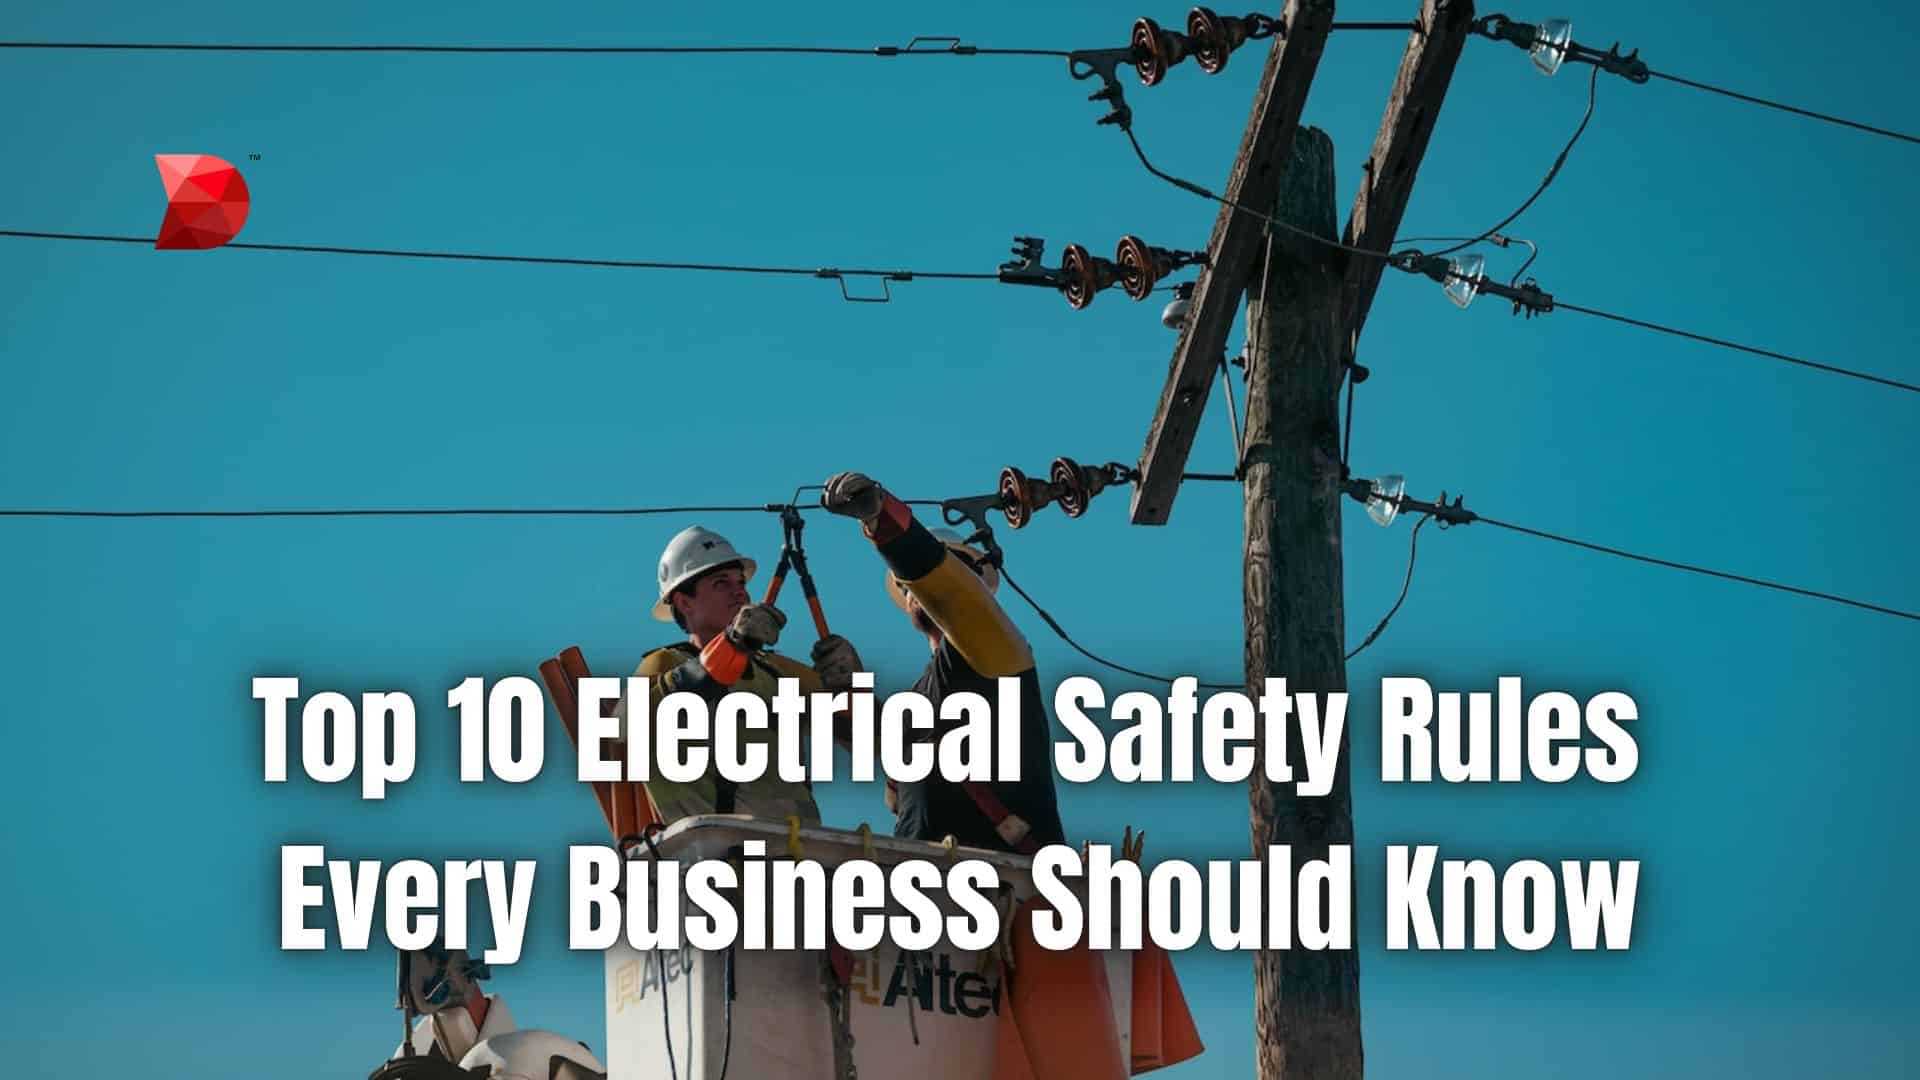 Top 10 Electrical Safety Rules Every Business Should Know